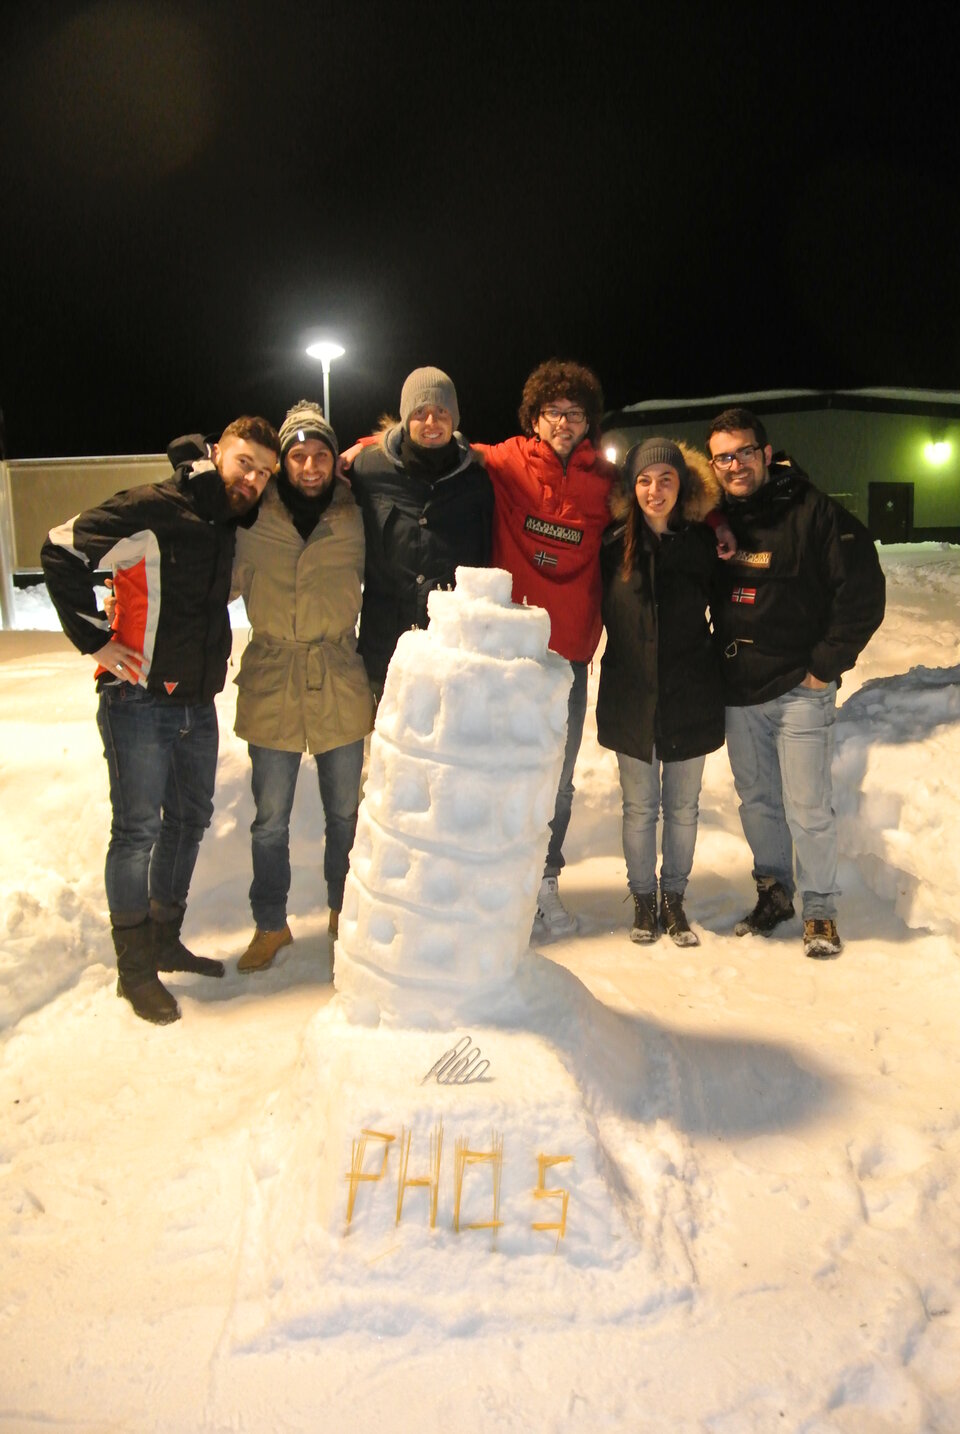 Winners of the snow castle competition